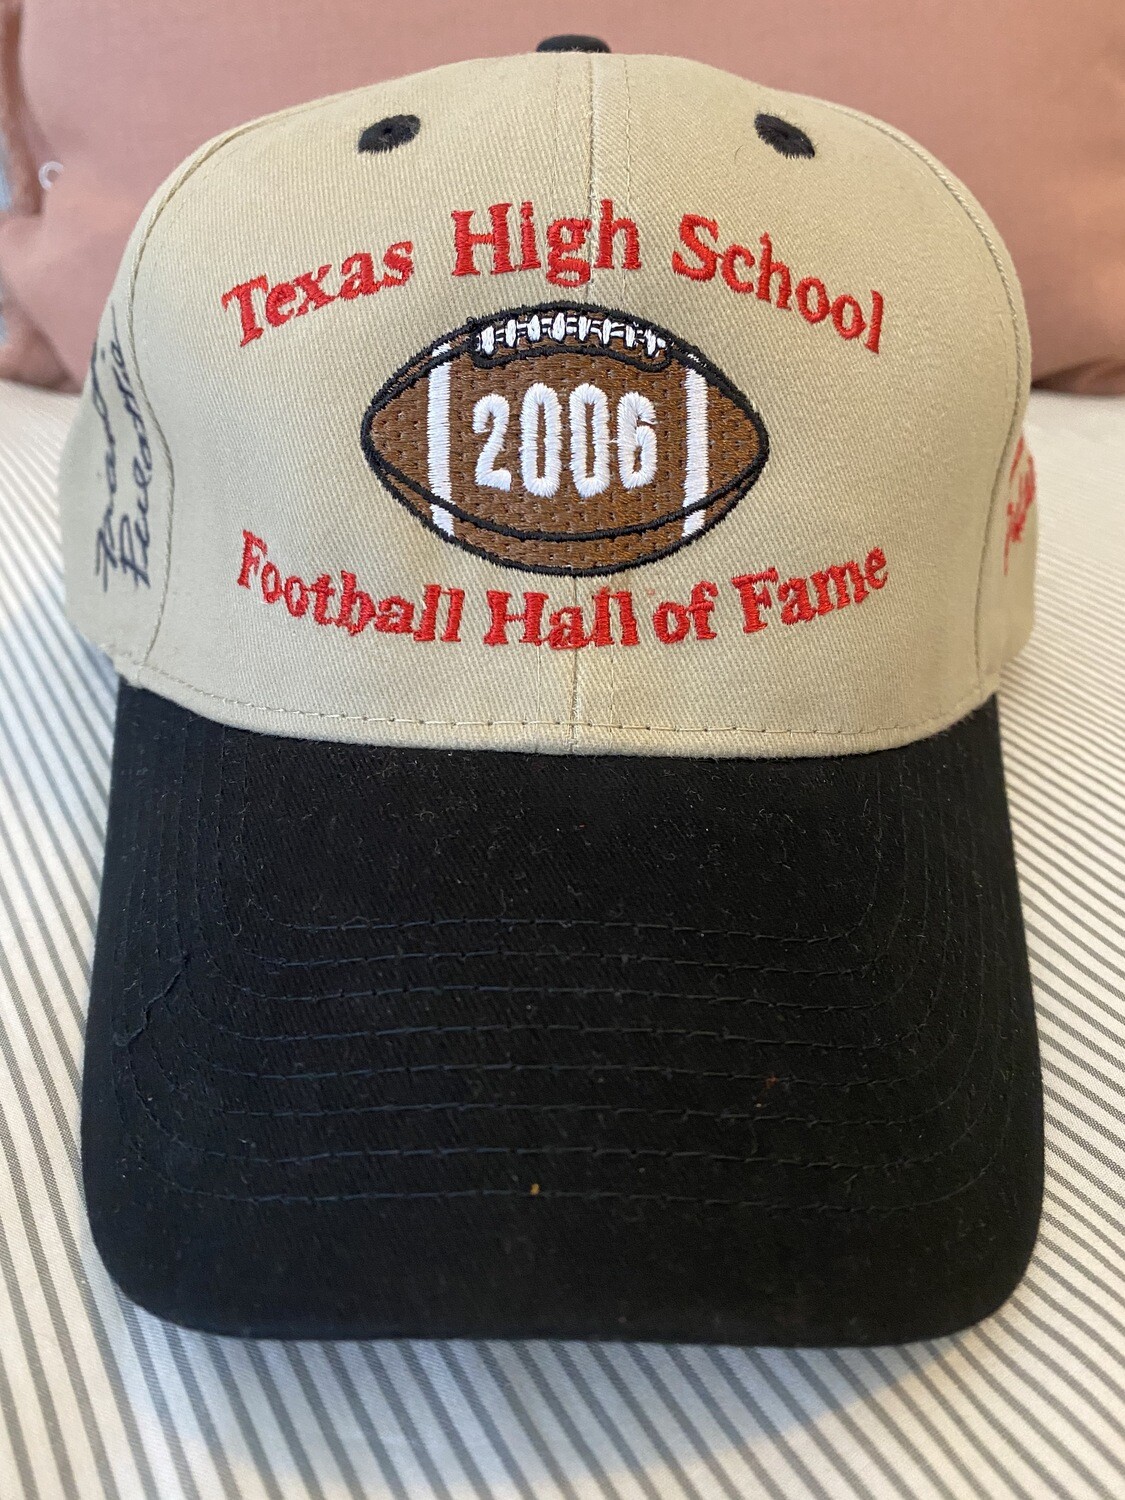 Francis Pulattie - Signed Hat 2006 Hall of Fame Inductee